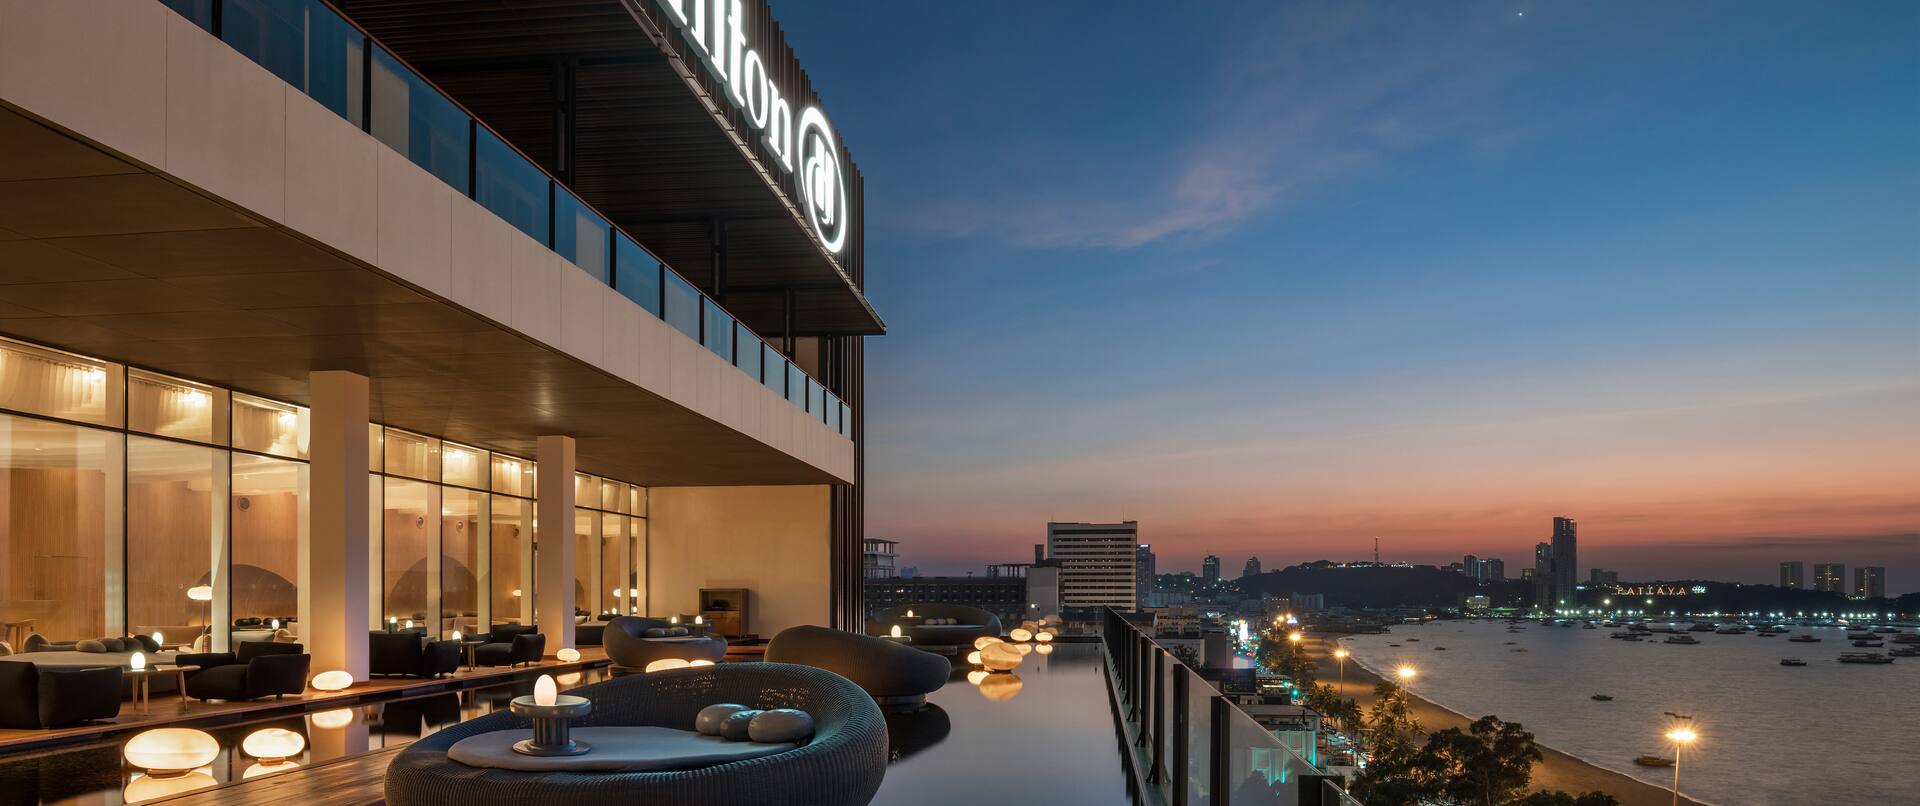 Terrace of Drift Lobby Lounge and Bar with View of the Bay at Sunset